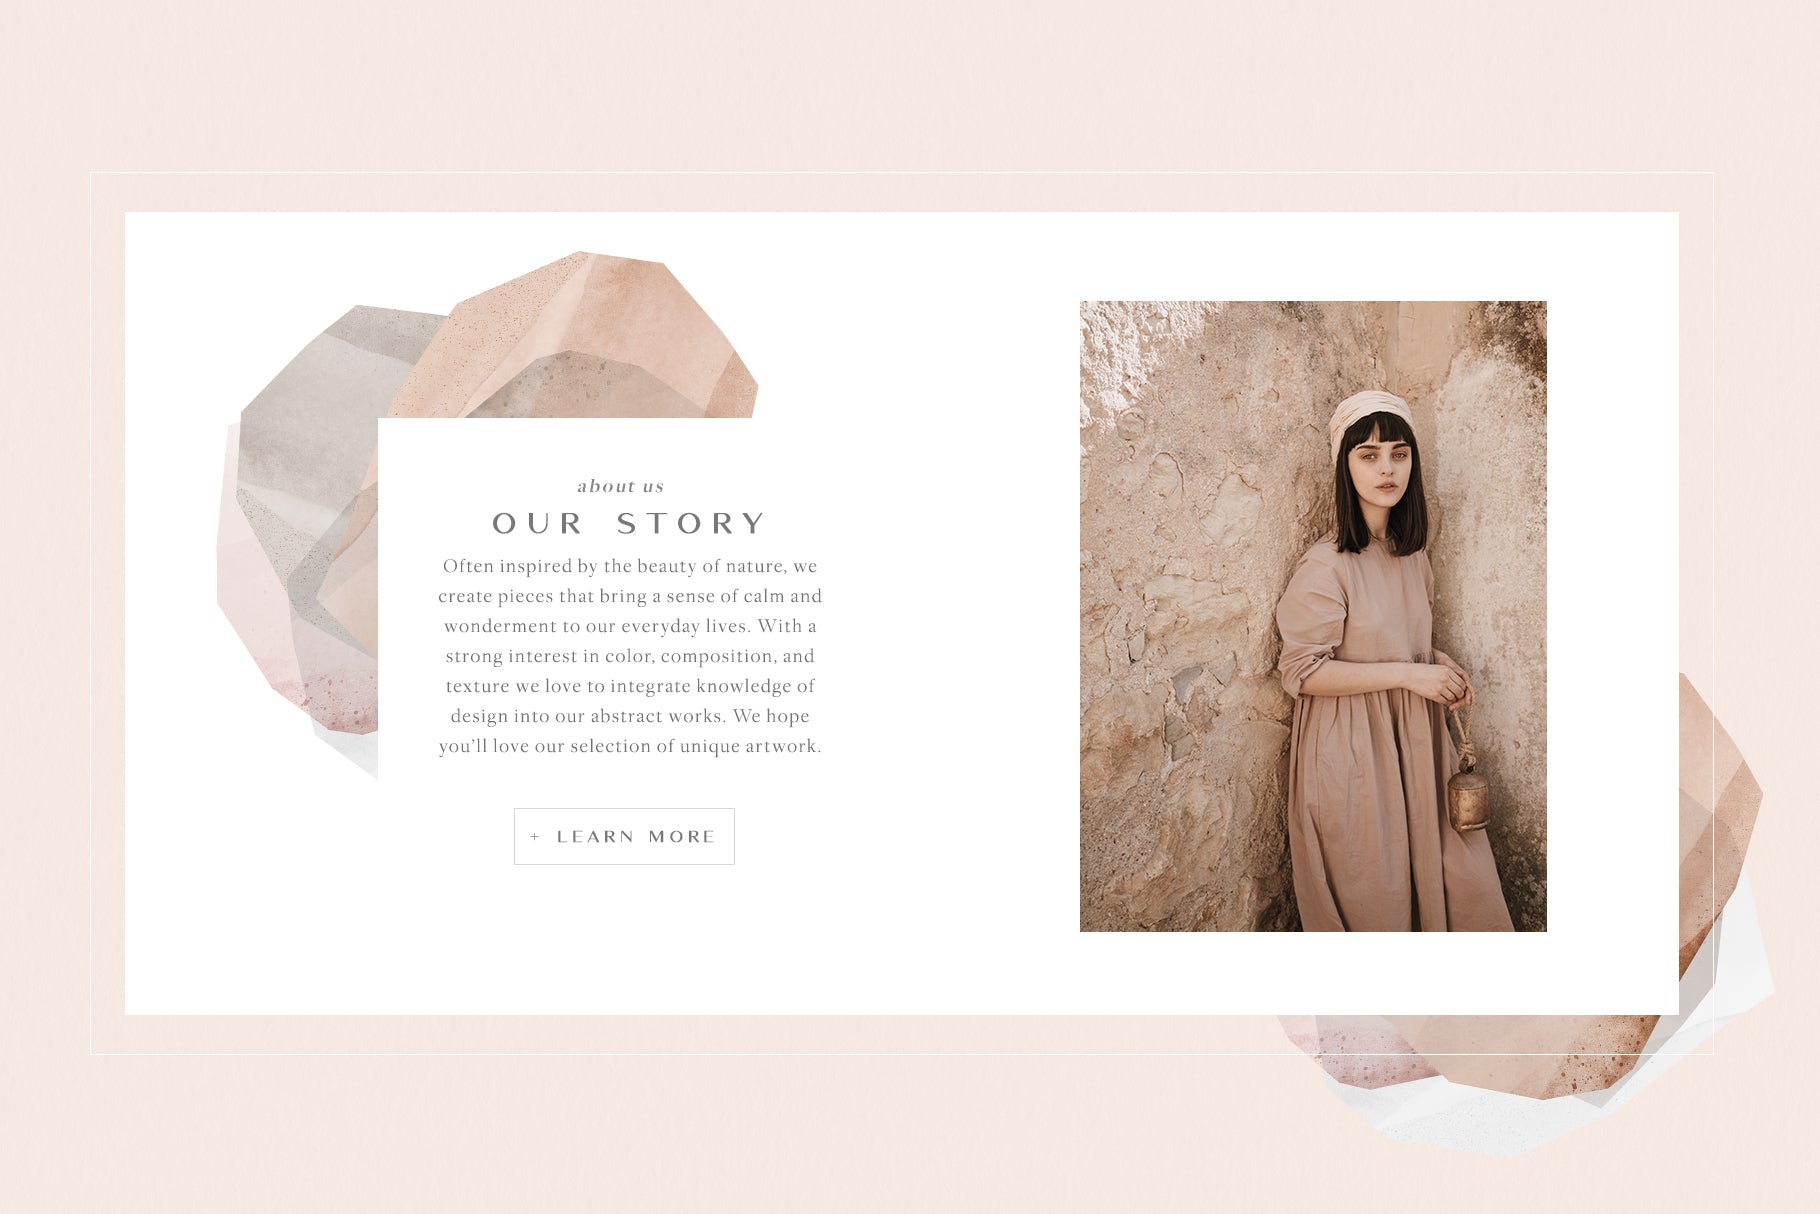 website example with abstract shapes and photo of woman on the right